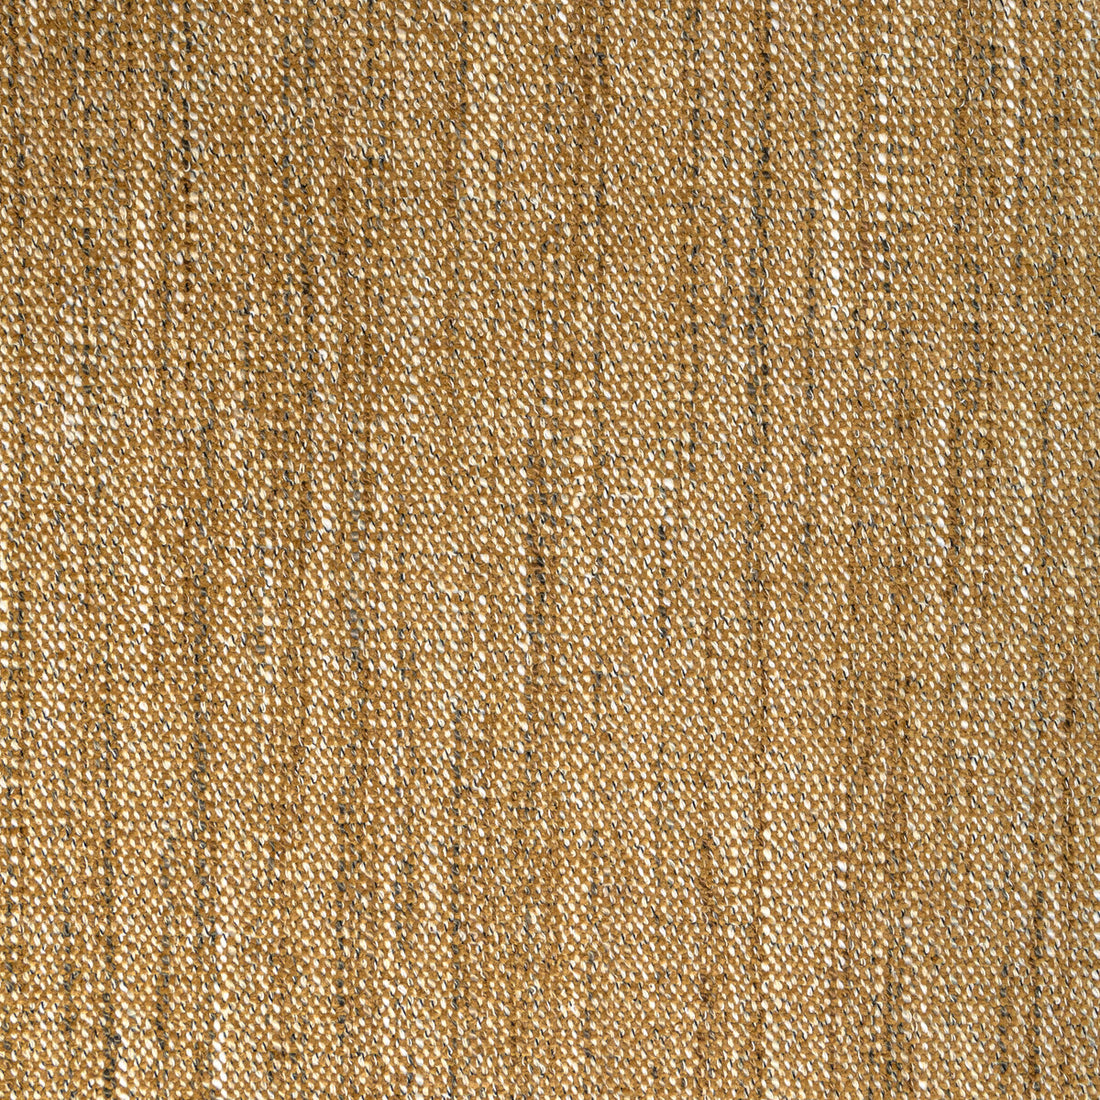 Delfino fabric in honey color - pattern 36748.4.0 - by Kravet Contract in the Refined Textures Performance Crypton collection